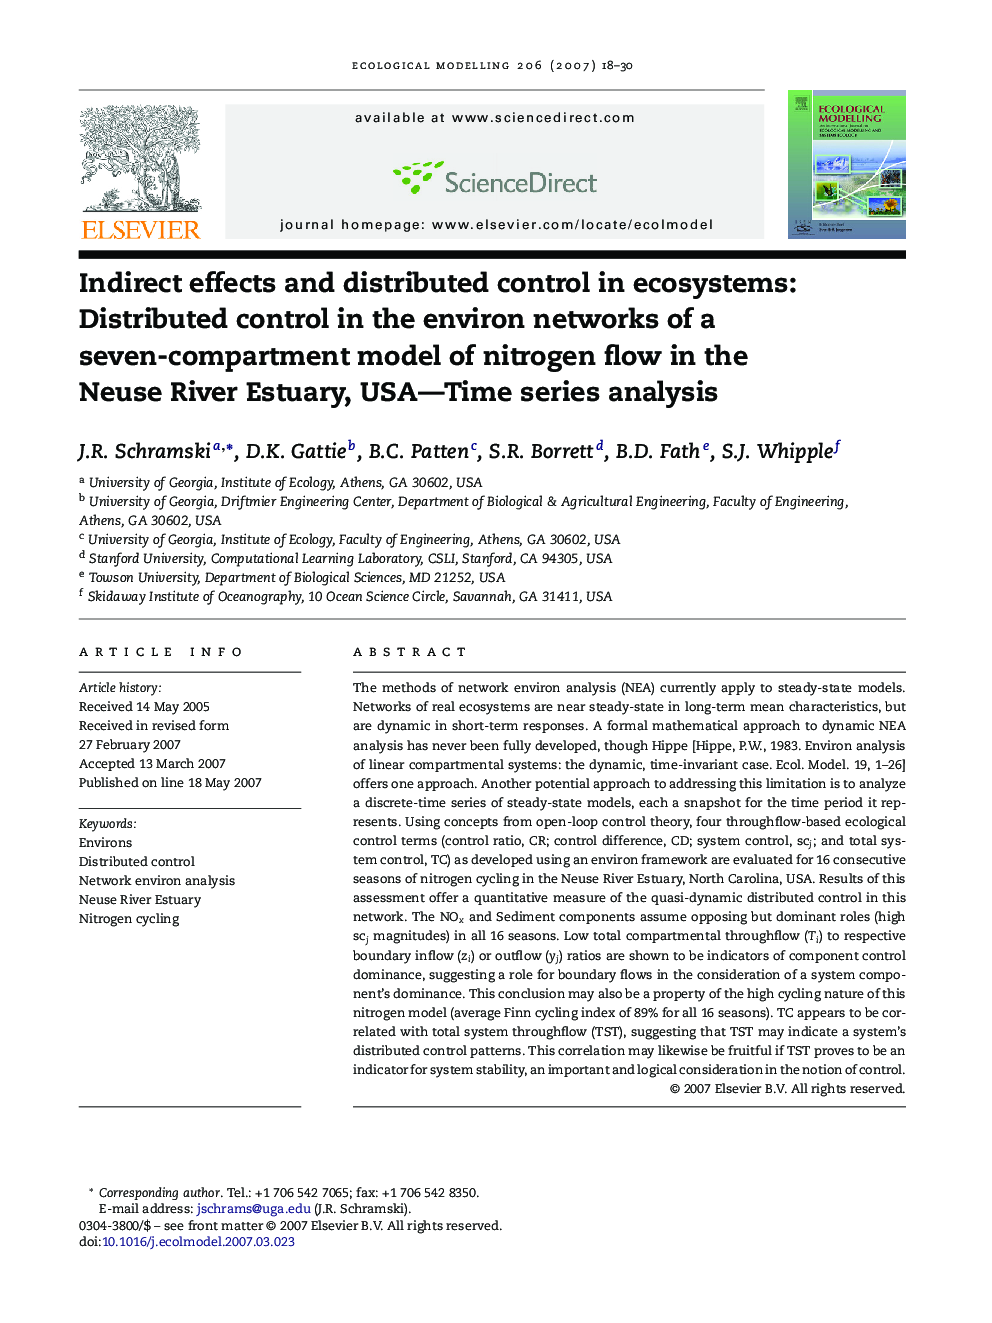 Indirect effects and distributed control in ecosystems: Distributed control in the environ networks of a seven-compartment model of nitrogen flow in the Neuse River Estuary, USA—Time series analysis